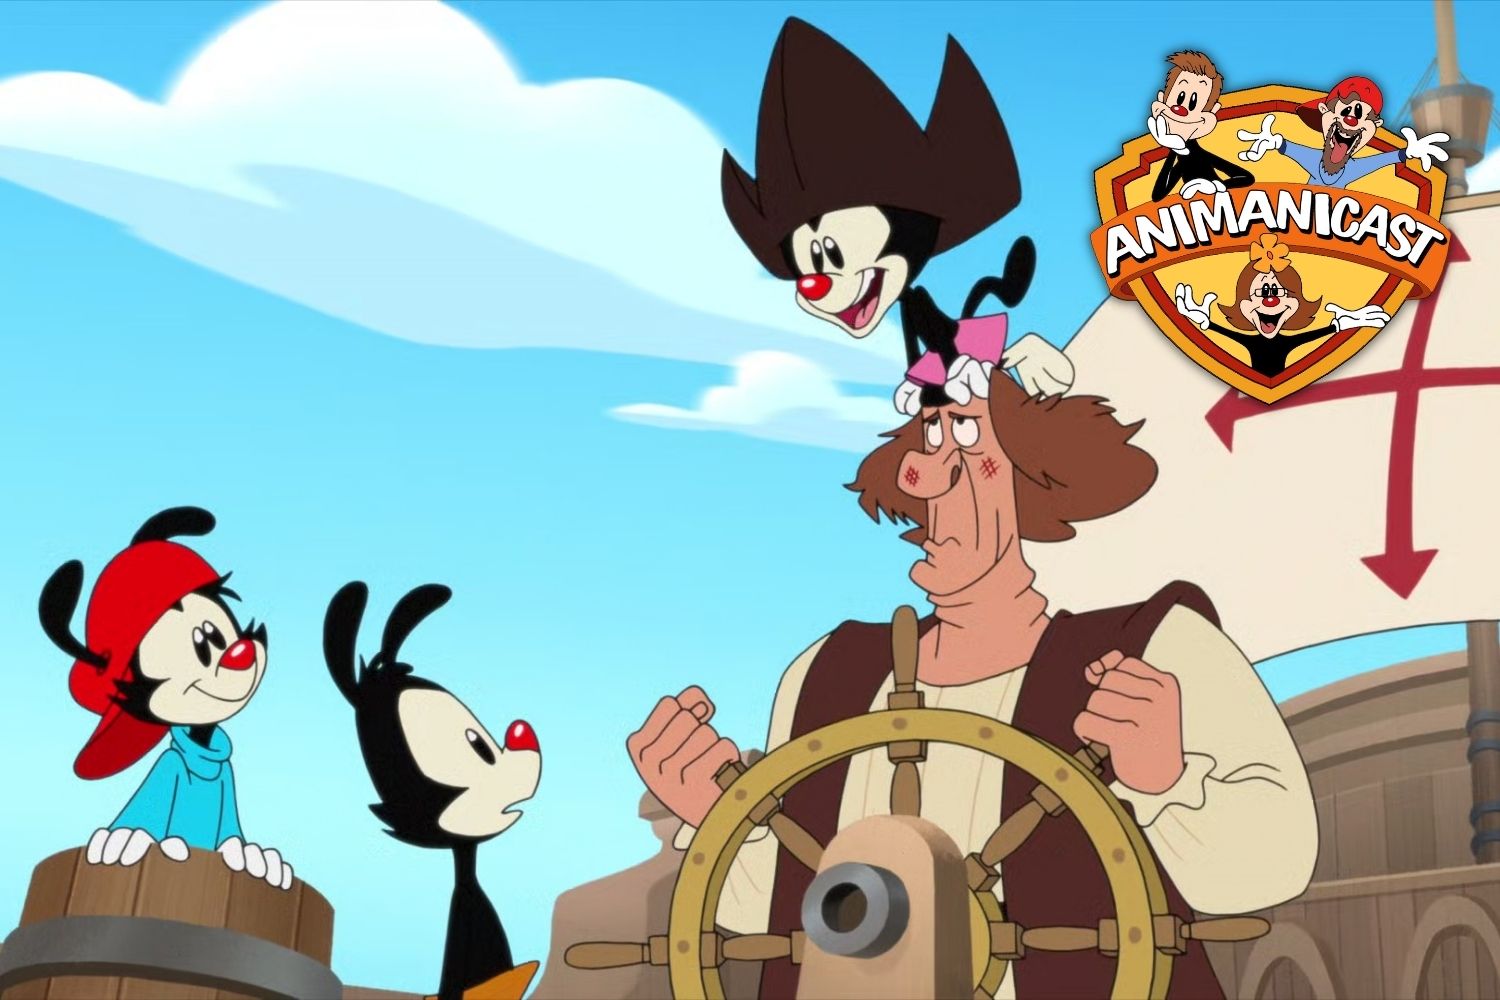 Christopher Columbusted Animaniacs Season 2 Episode 9 Review